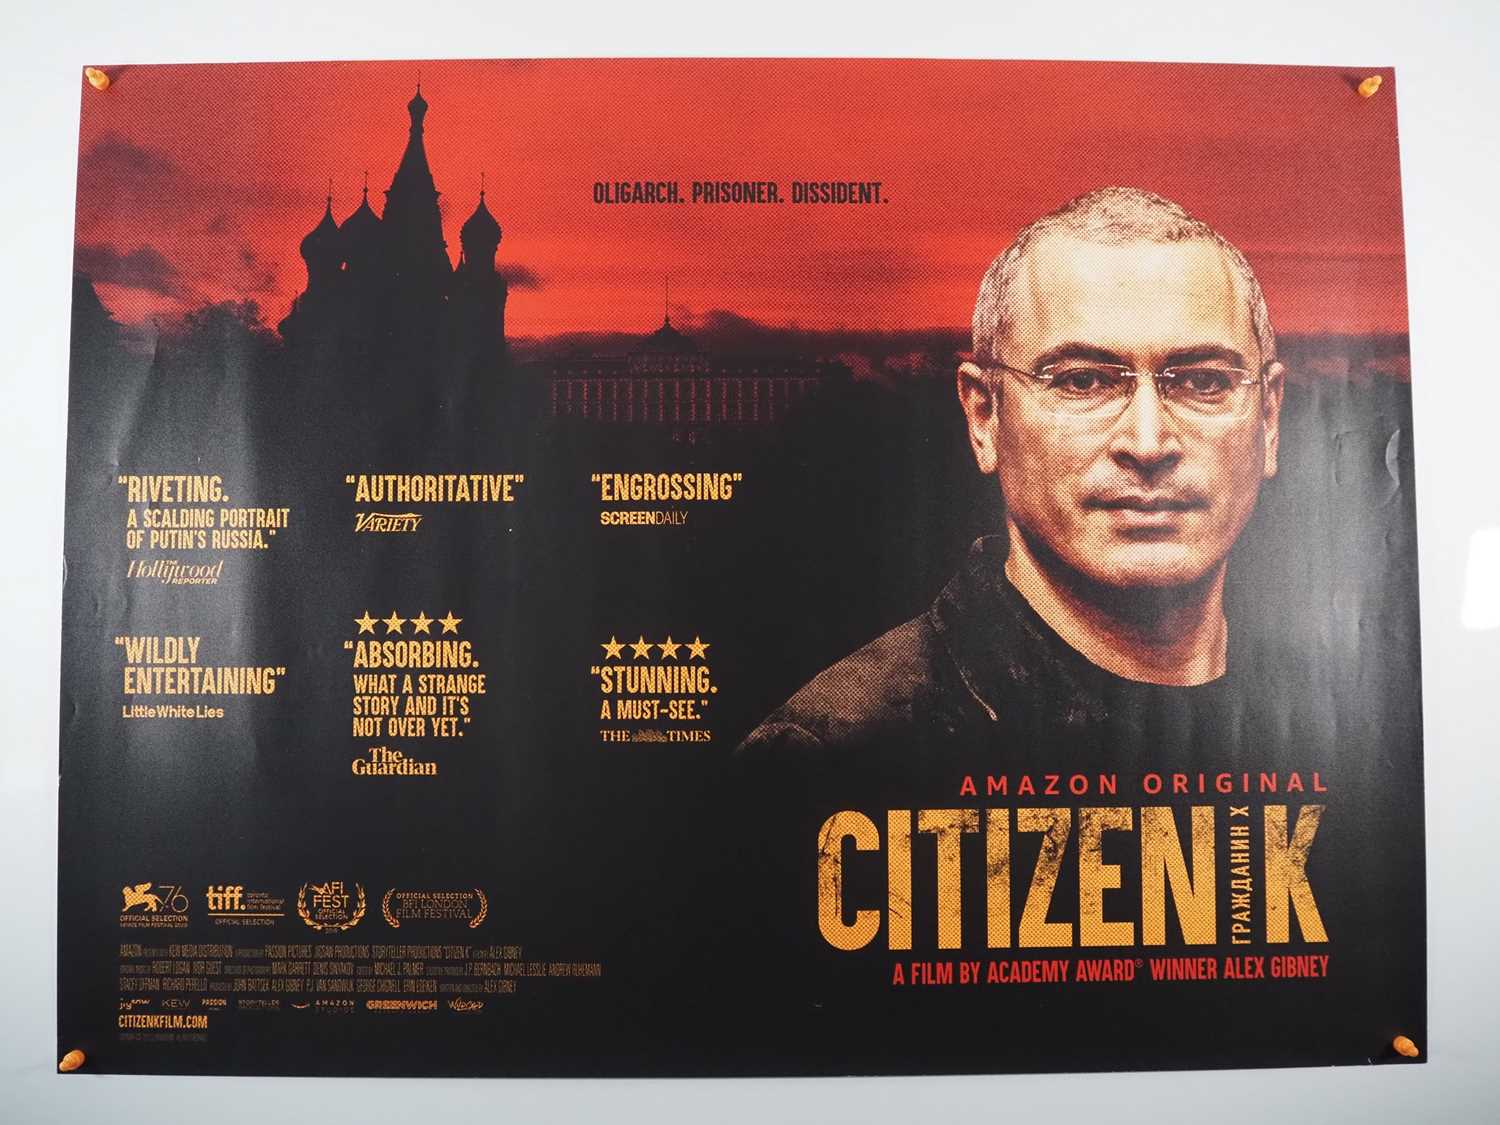 CITIZEN K (2019) - A pair of UK Quad film posters for this Alex Gibney documentary about Mikhail